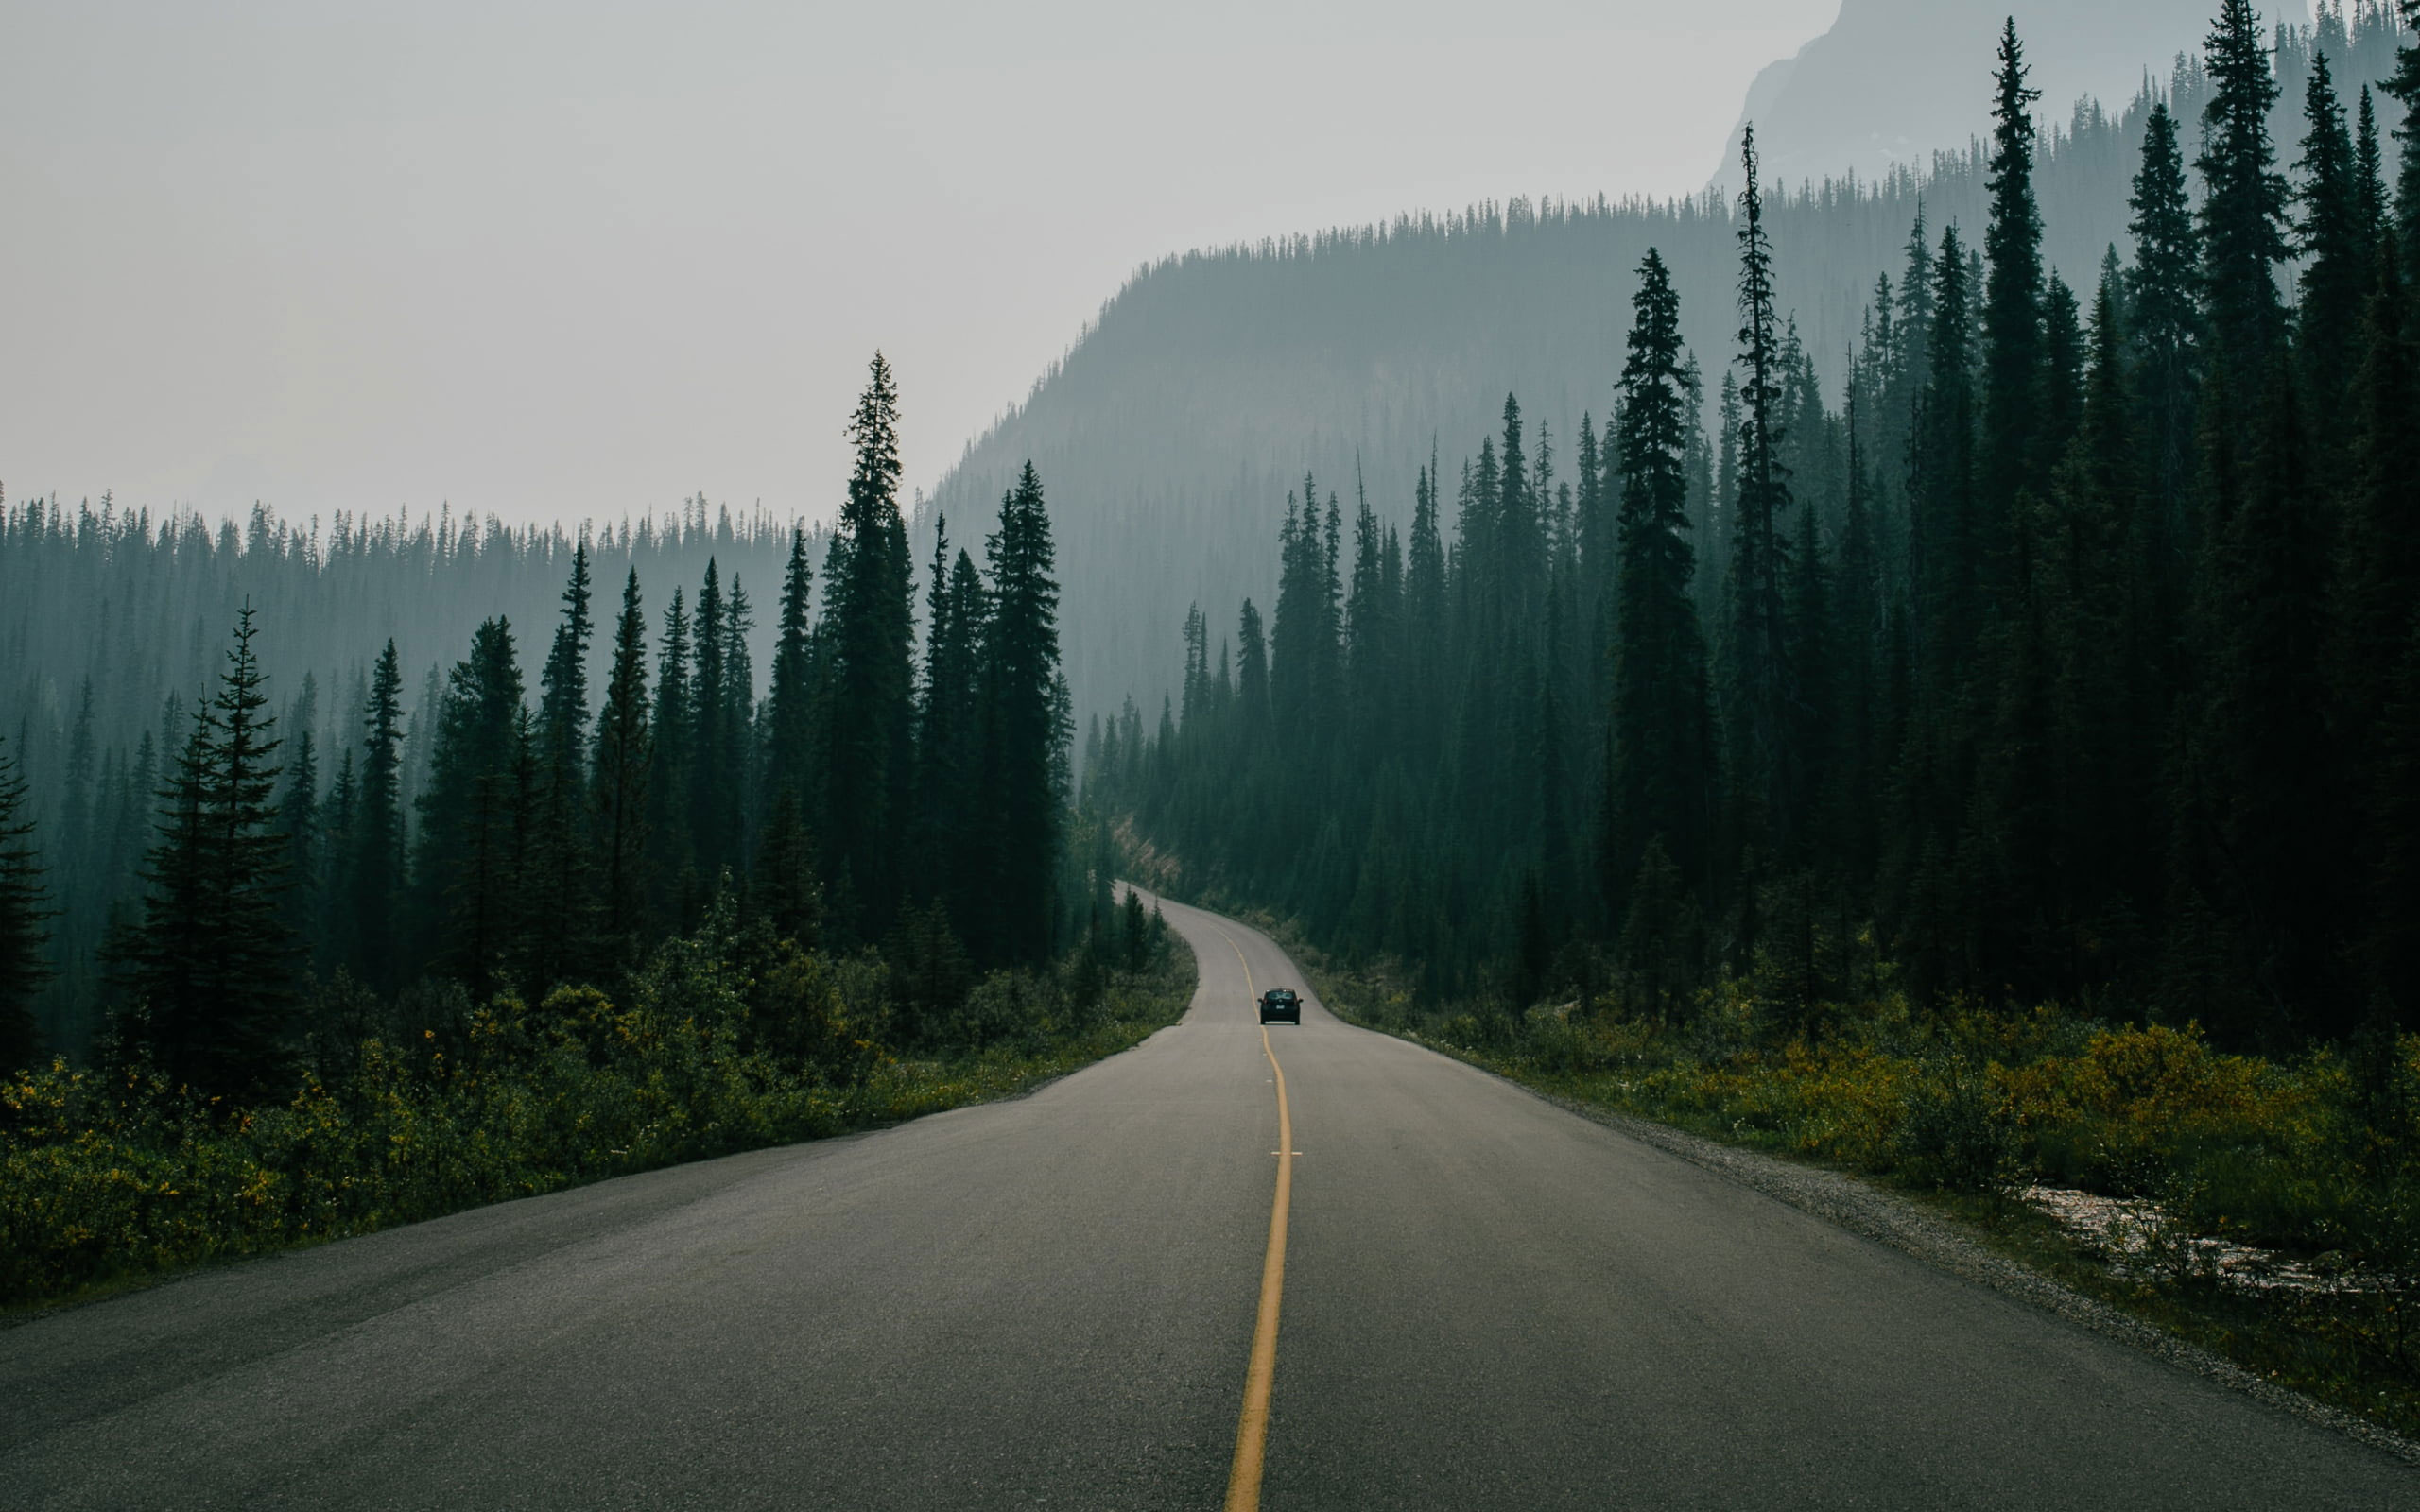 Road surrounded with trees wallpaper, nature, landscape, car, pine trees